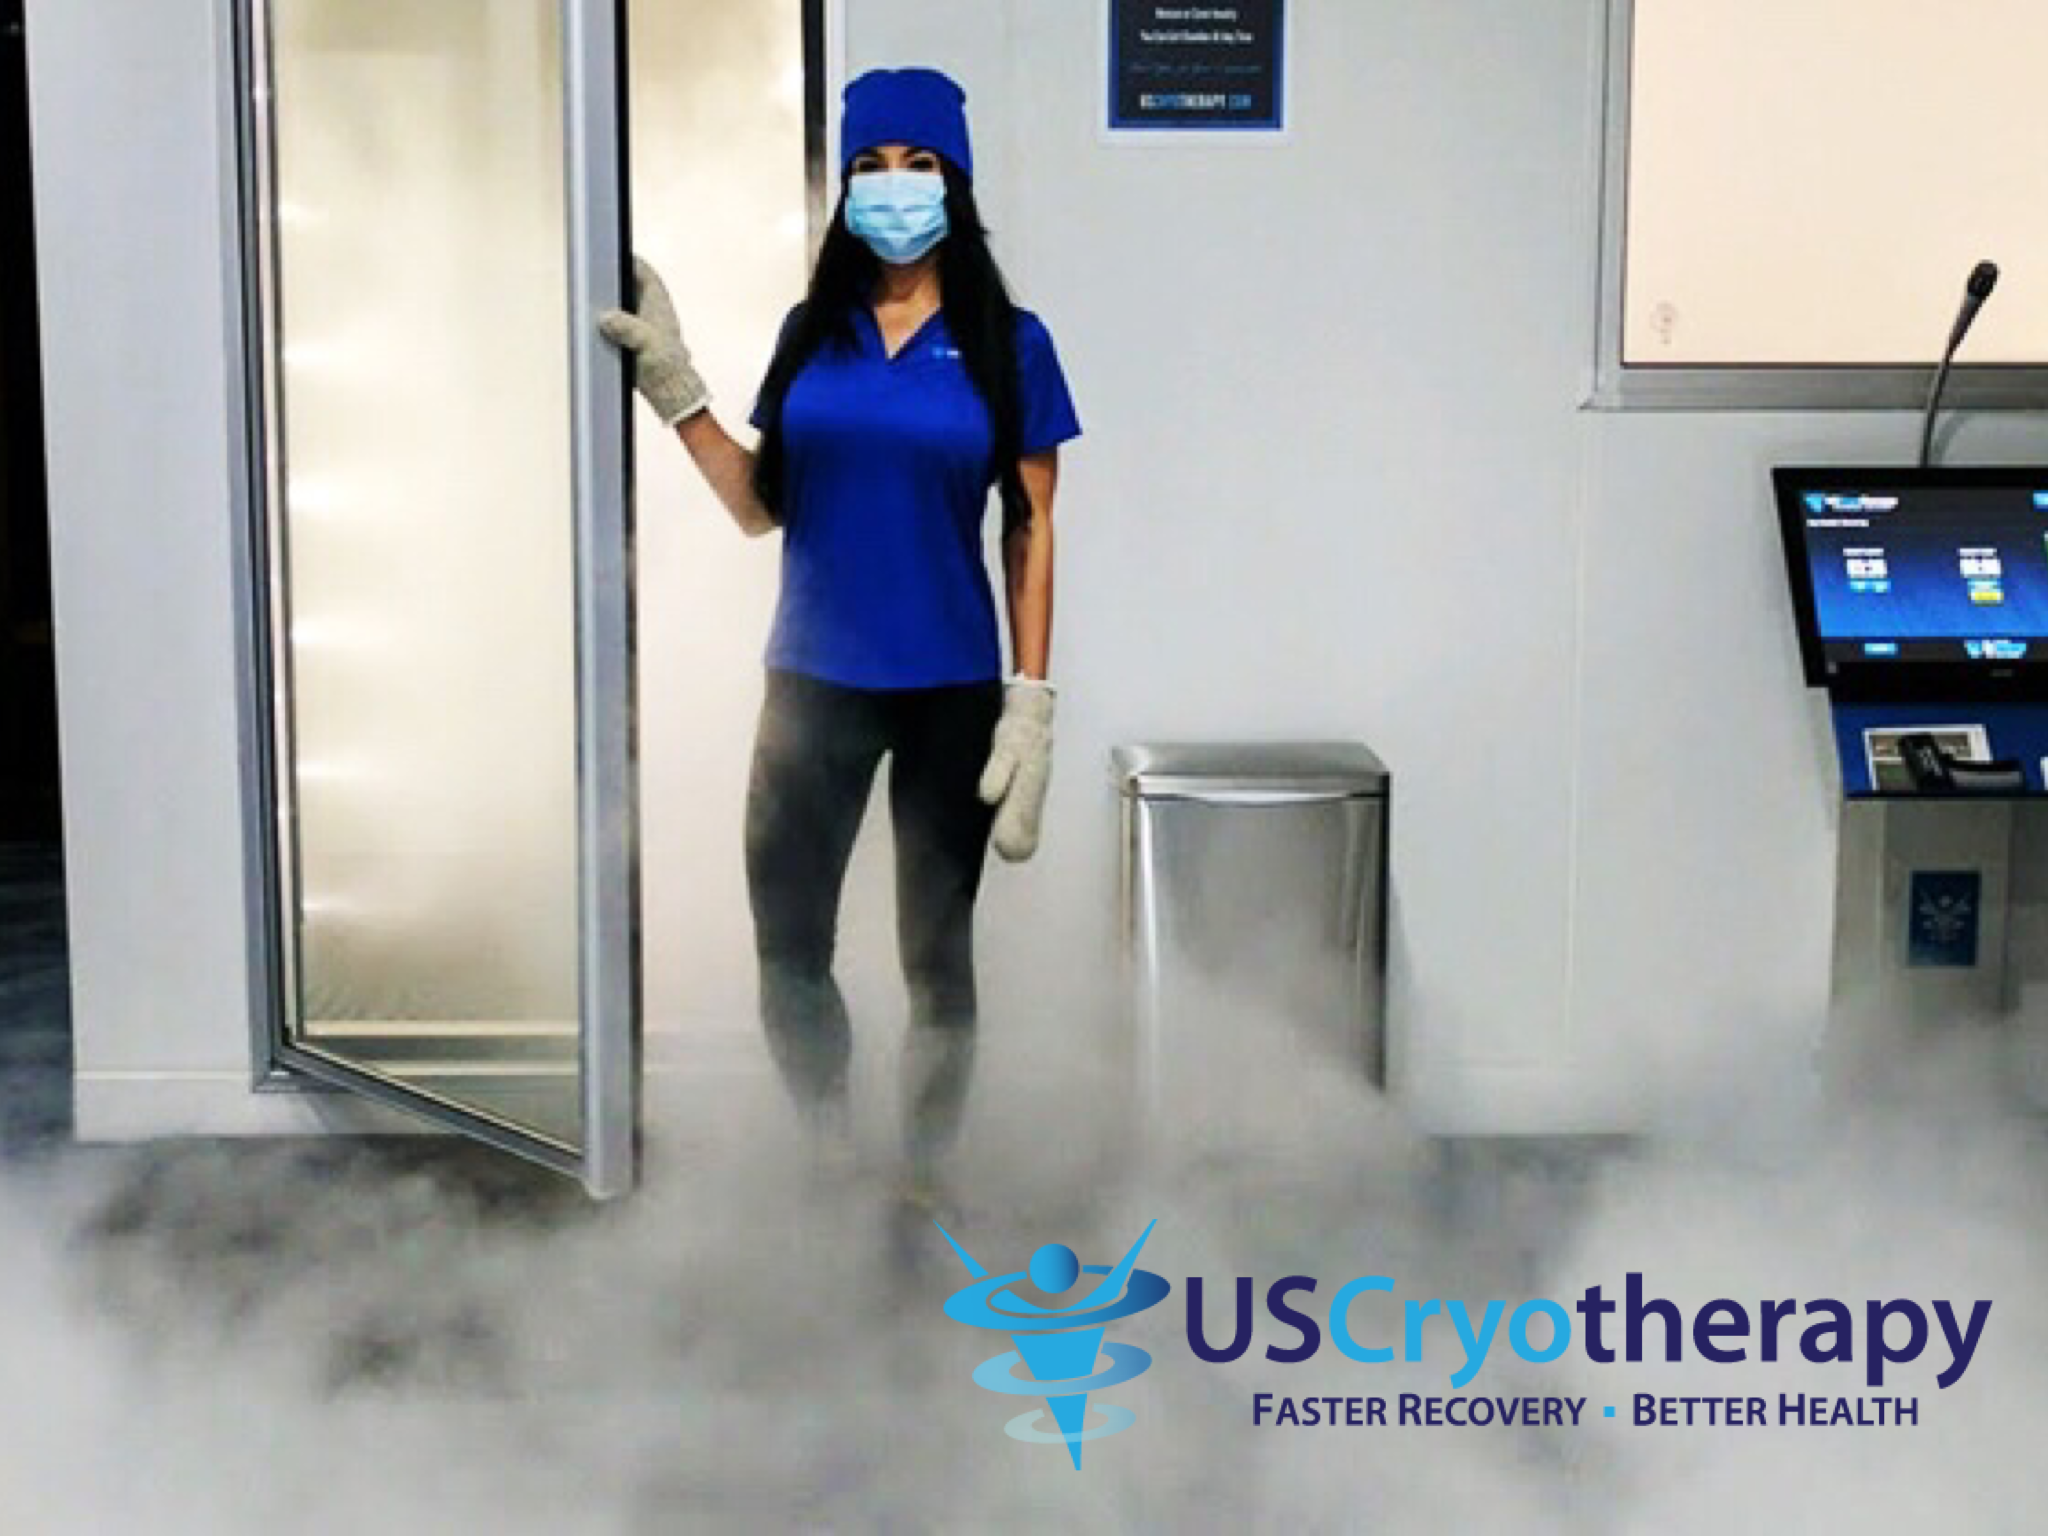 US Cryotherapy Store